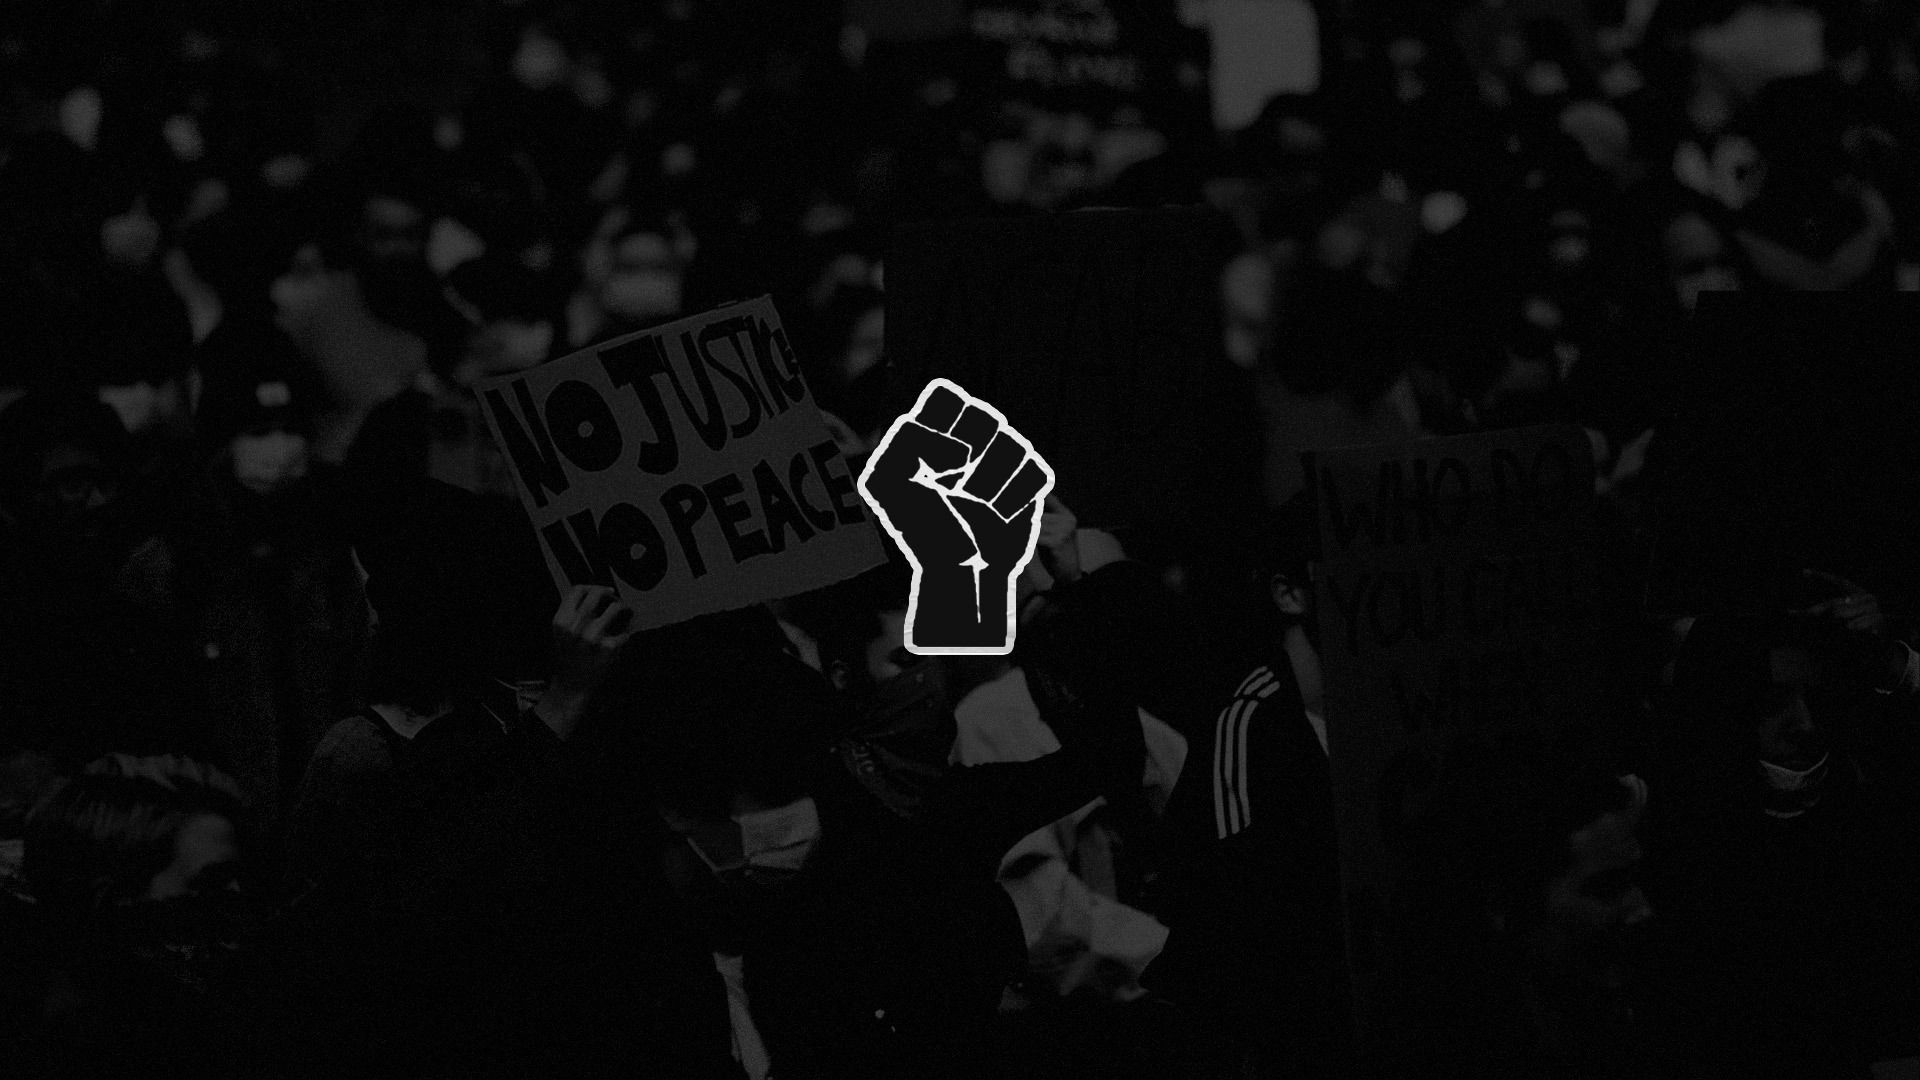 Here’s how you can support the fight against systemic racism, inequality and police brutality